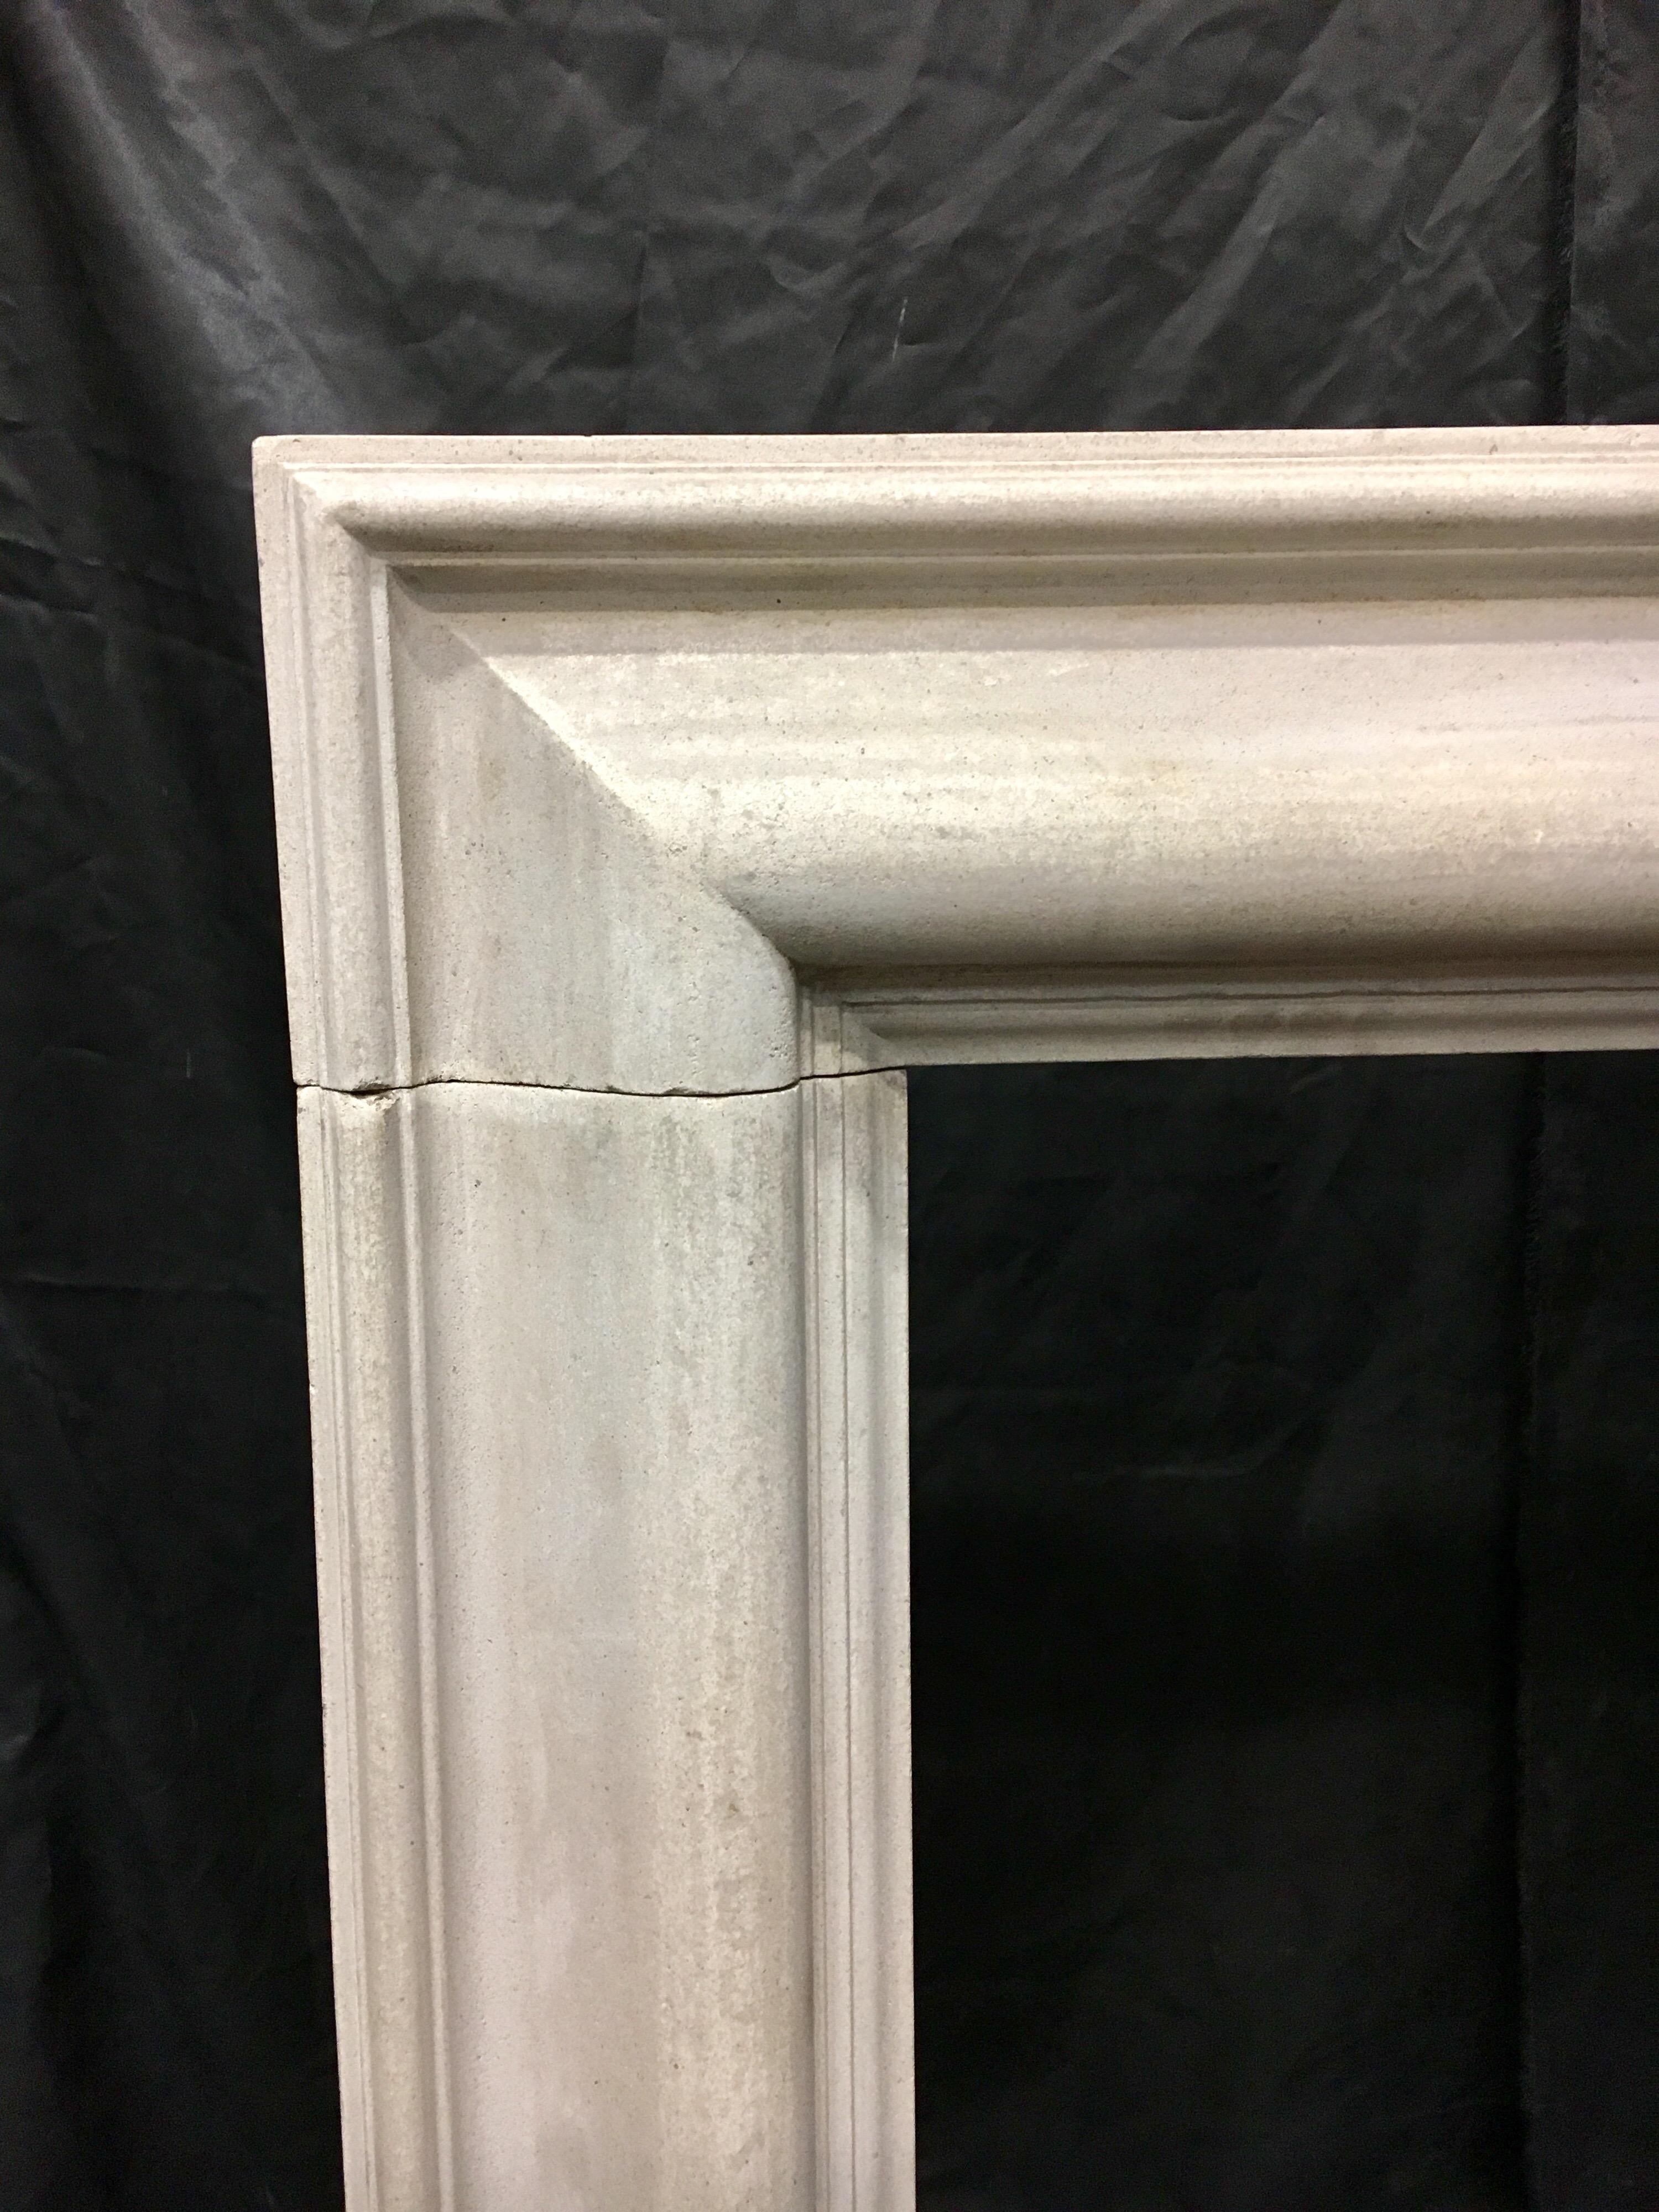 A petite  Edwardian reconstituted stone bolection of simple form- finishing on to square foot blocks, this would suit a smaller room.

English, circa 1925. 

Measures: Fire opening: 840 mm wide x 760 mm high.
Width over the foot blocks: 1223 mm.